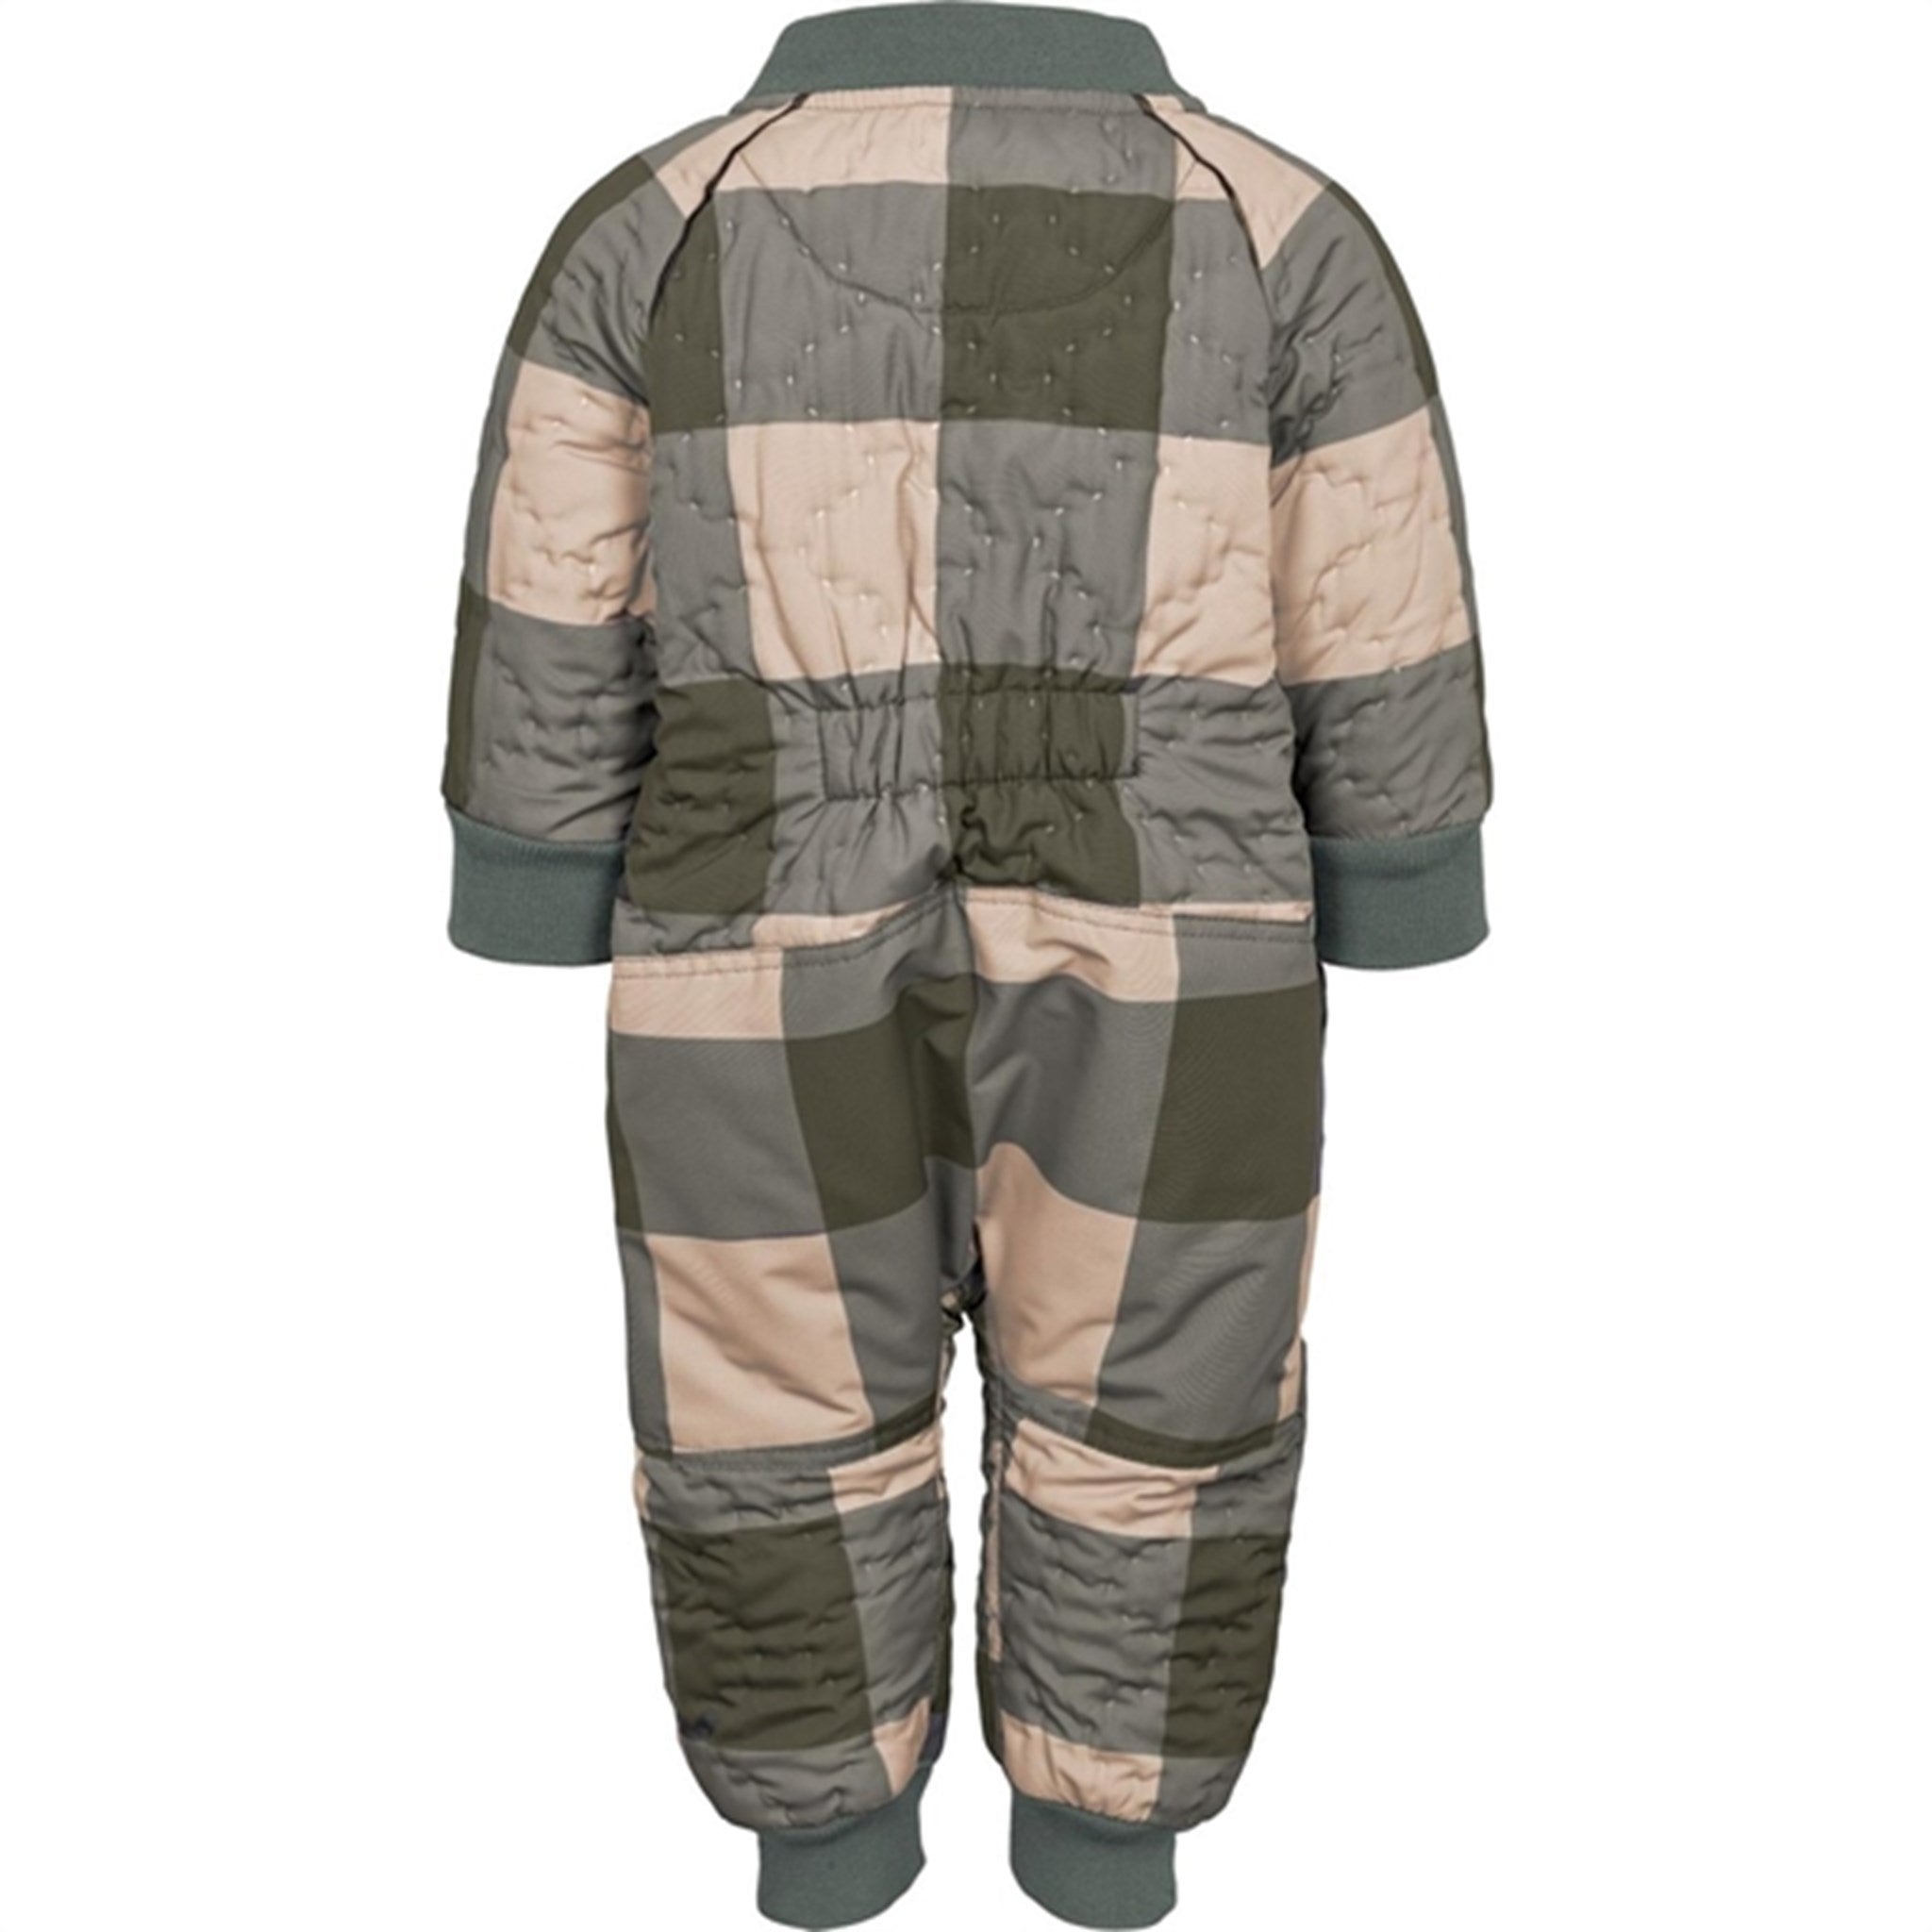 MarMar Summer Check Oza Thermo Suit 2